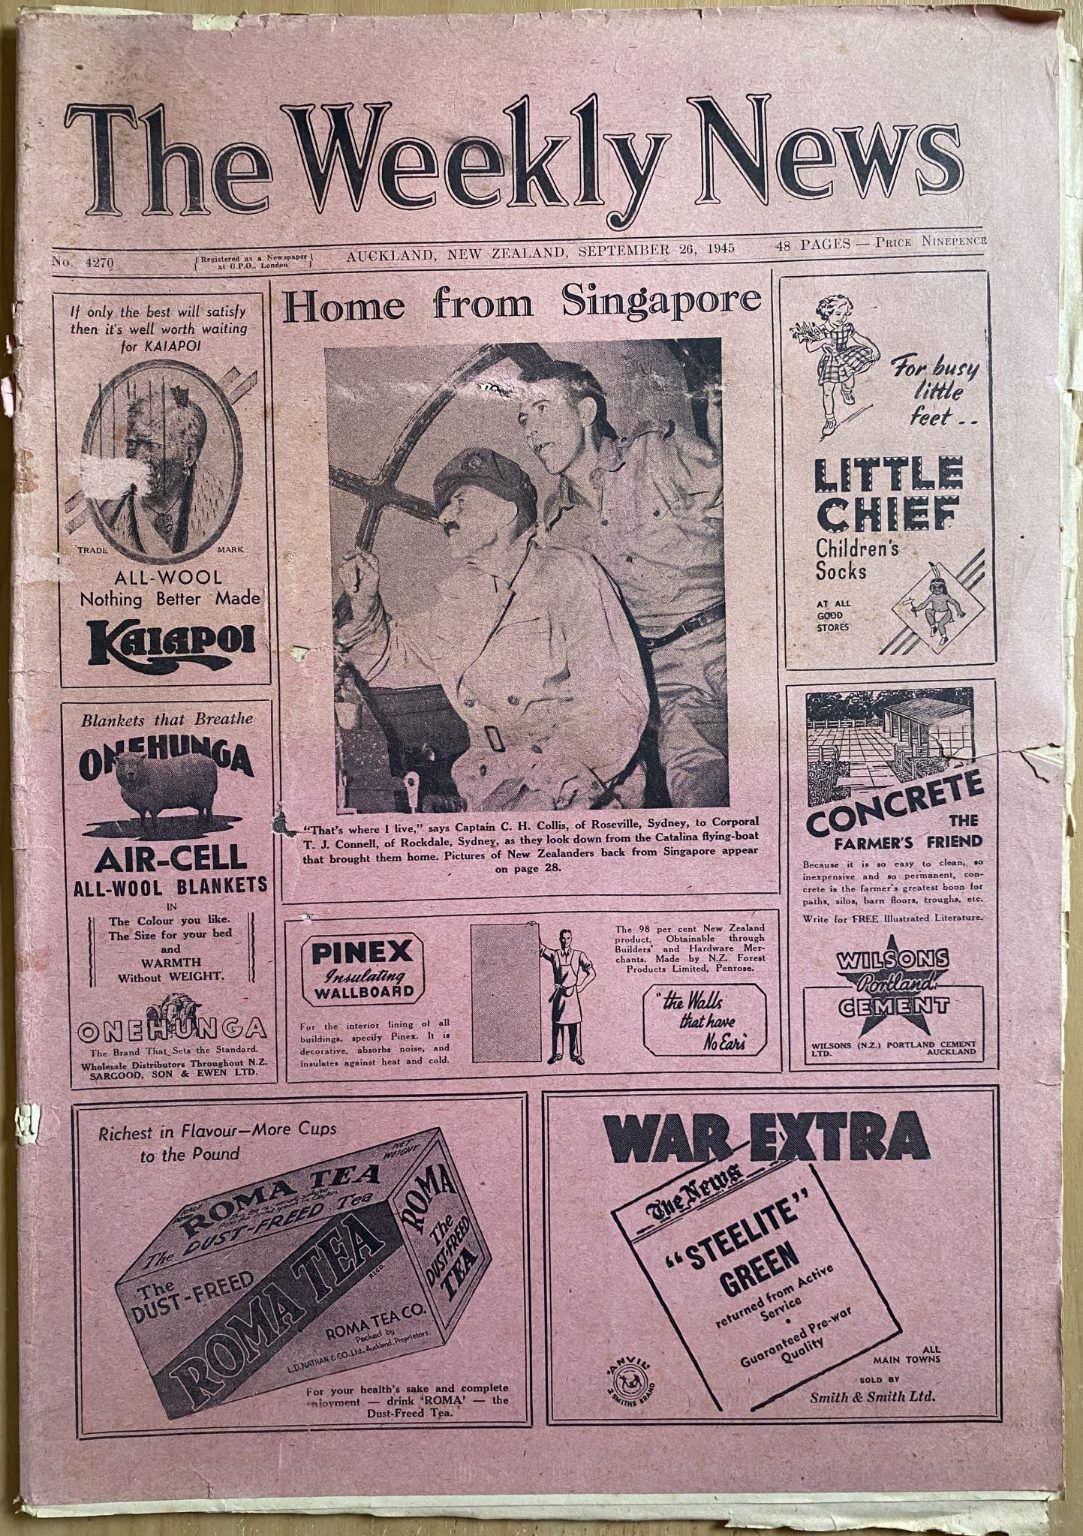 OLD NEWSPAPER: The Weekly News - No. 4270, 26 September 1945